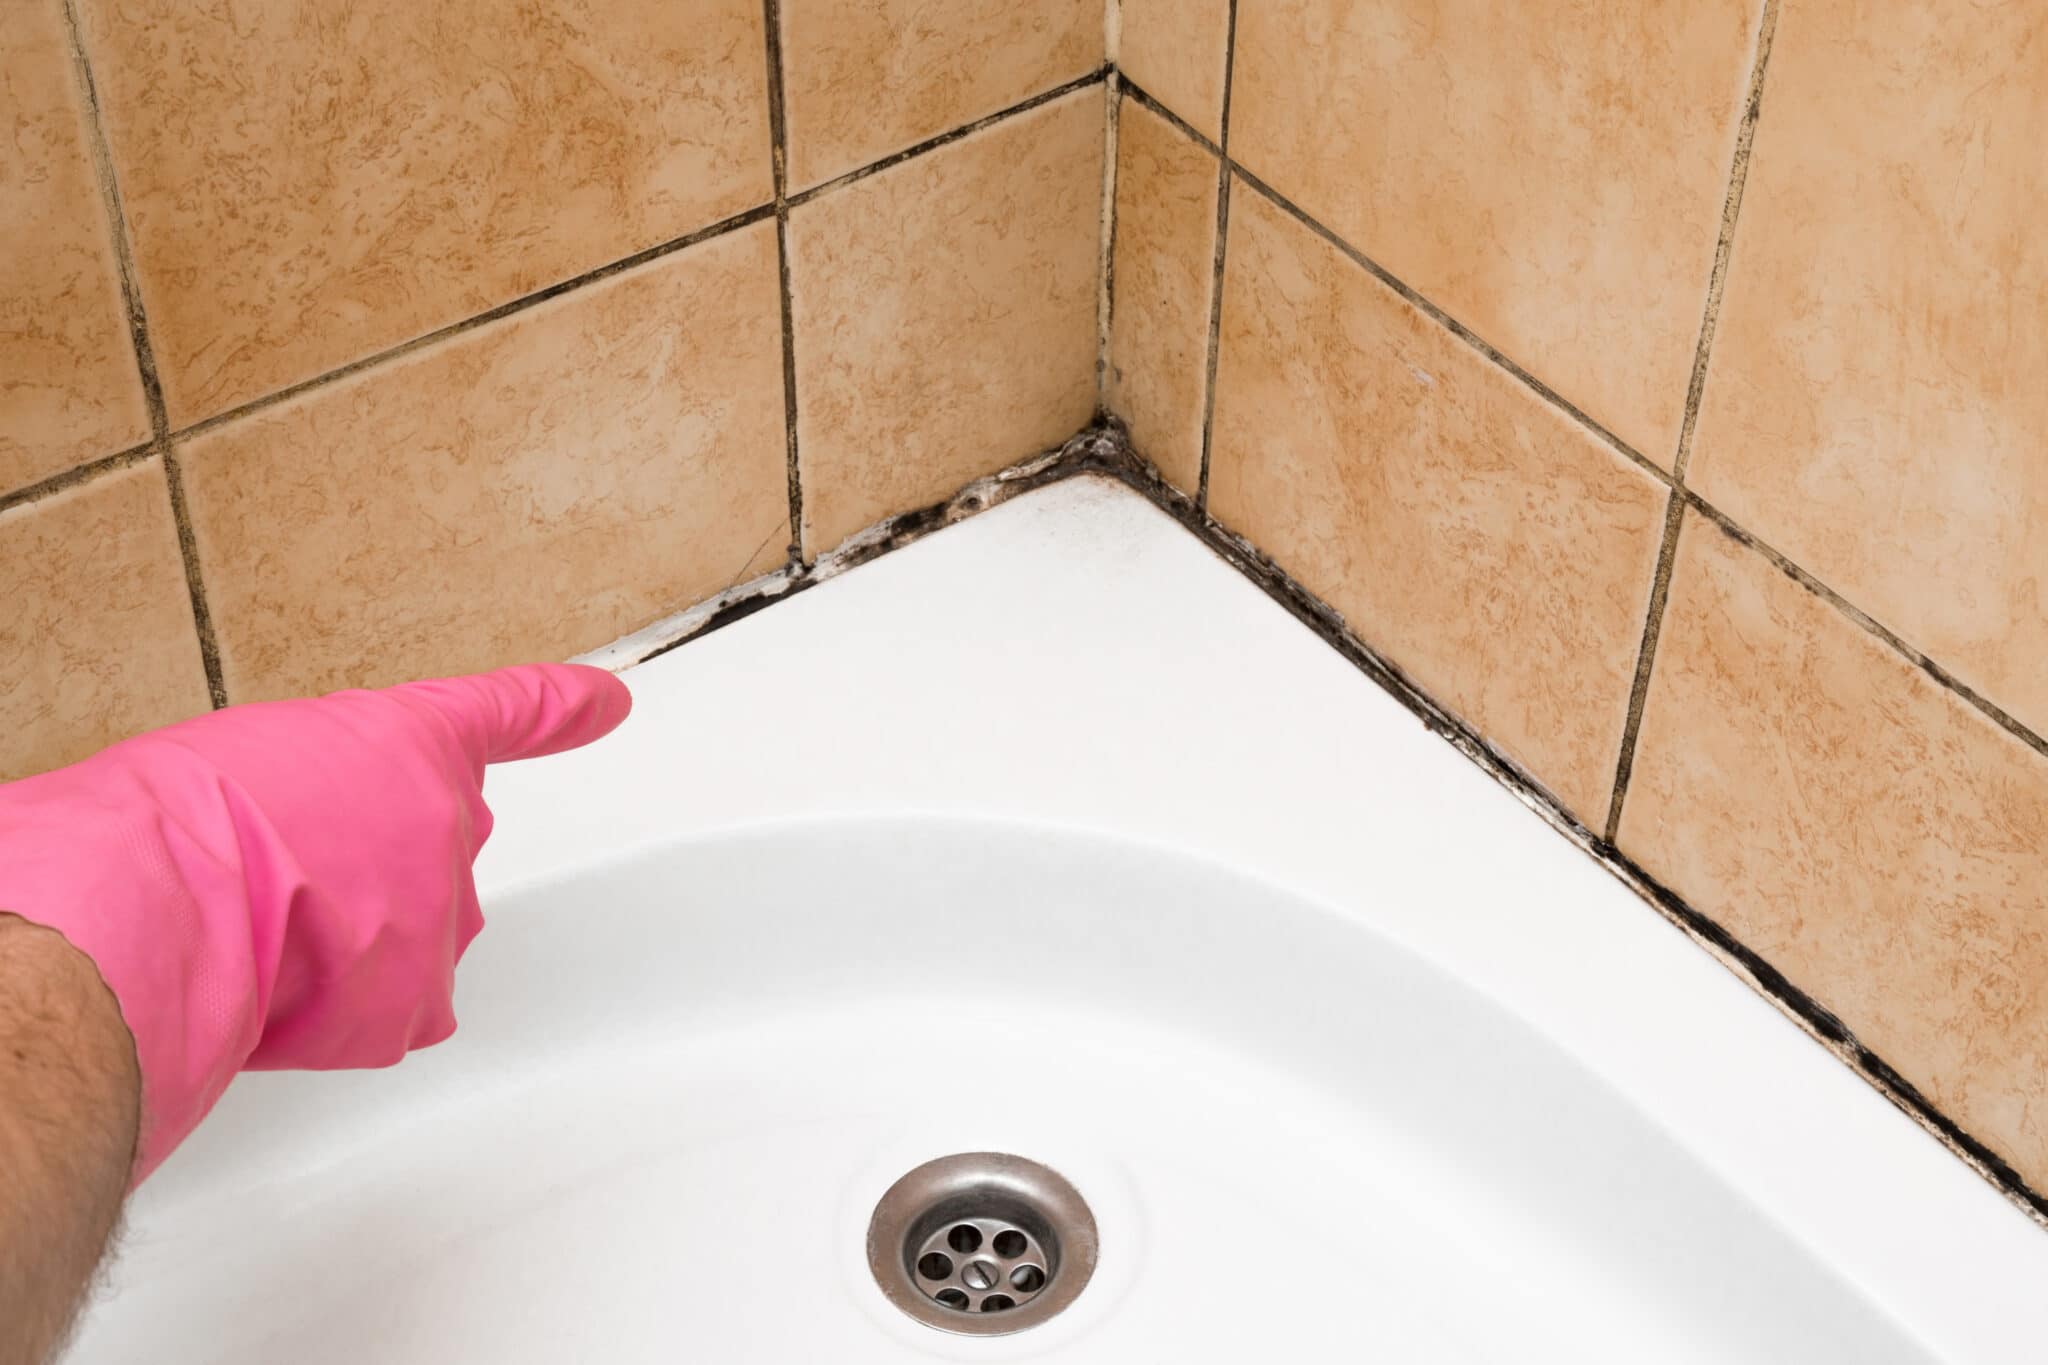 How to Clean Bathroom Tile and Grout